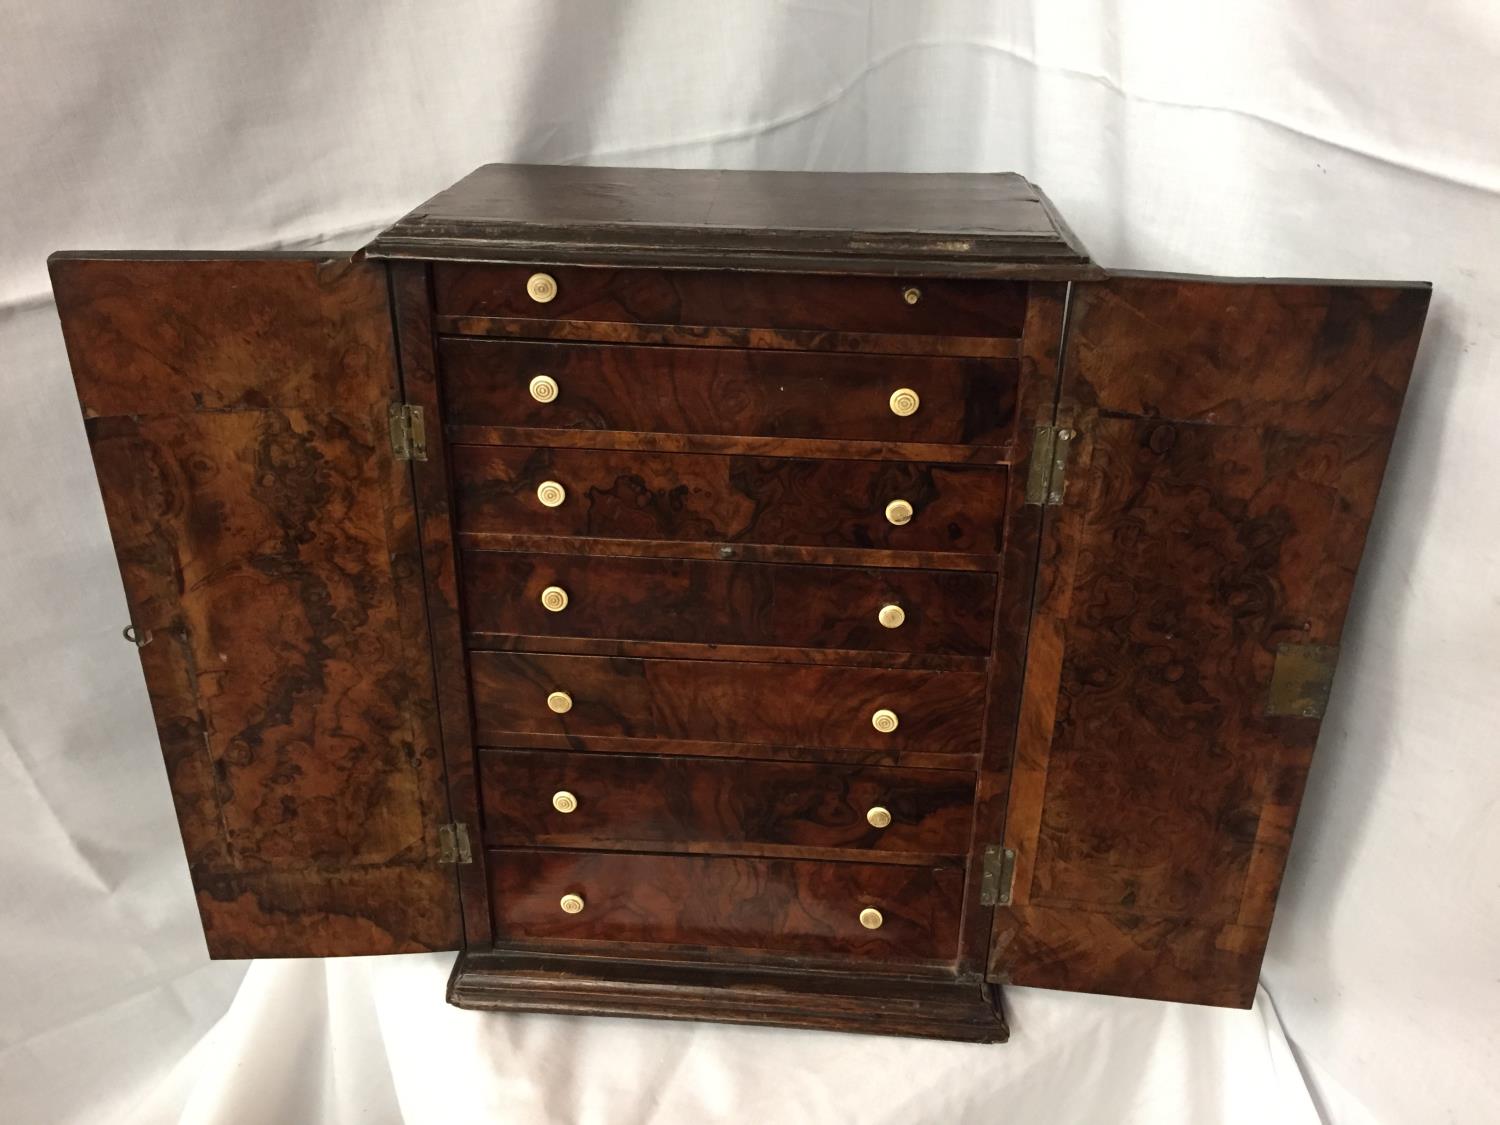 A WALNUT MINATURE CABINET TO INCORPORATE SEVEN DRAWERS 44CM HIGH POSSIBLY A WATCH MAKERS CABINET - Image 3 of 5